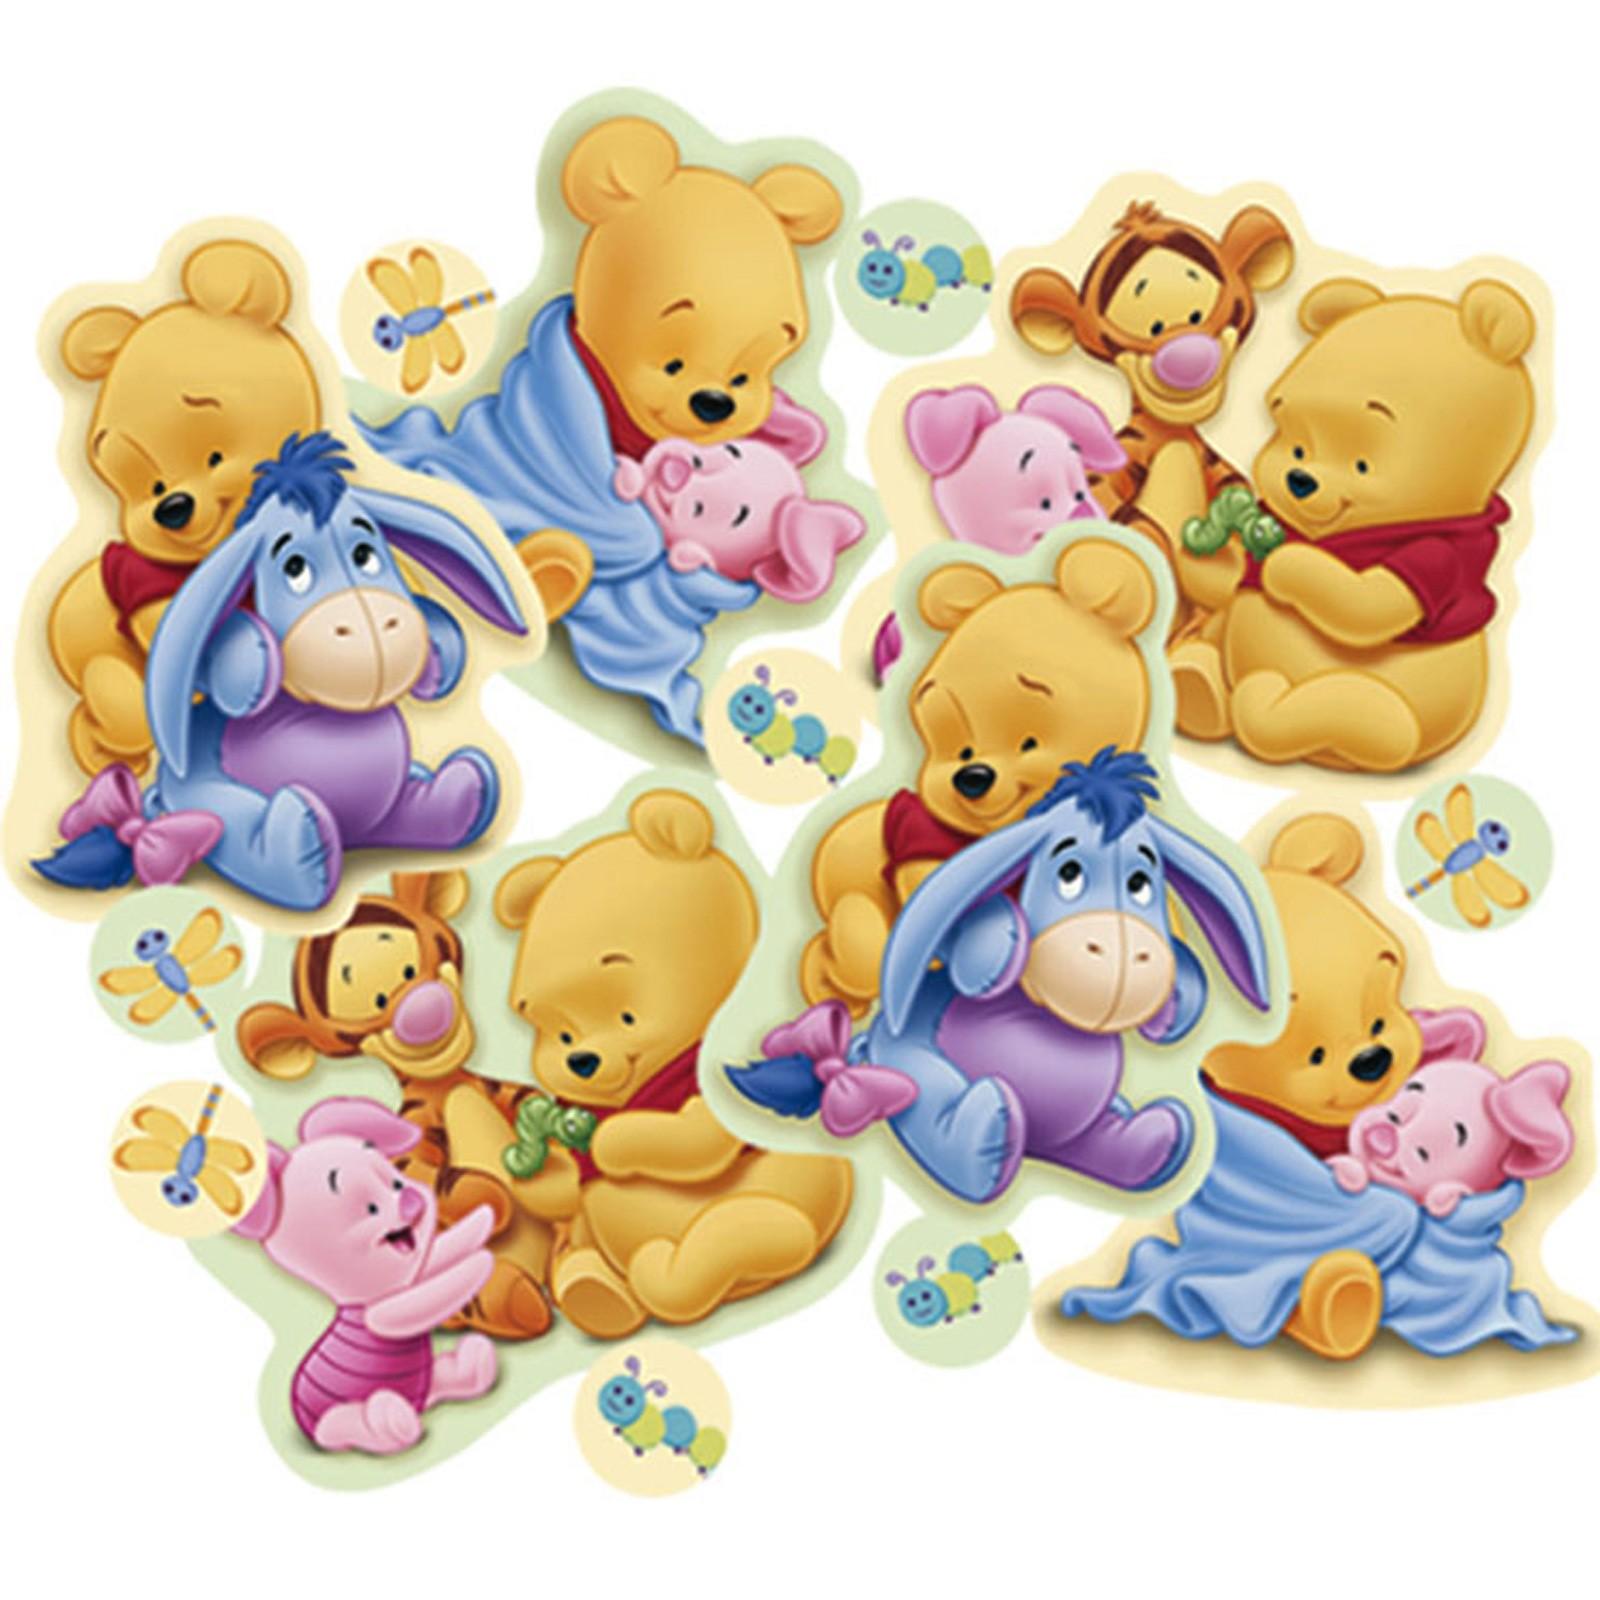 Pooh Bear Wallpaper Background Images | HD Wallpapers Range